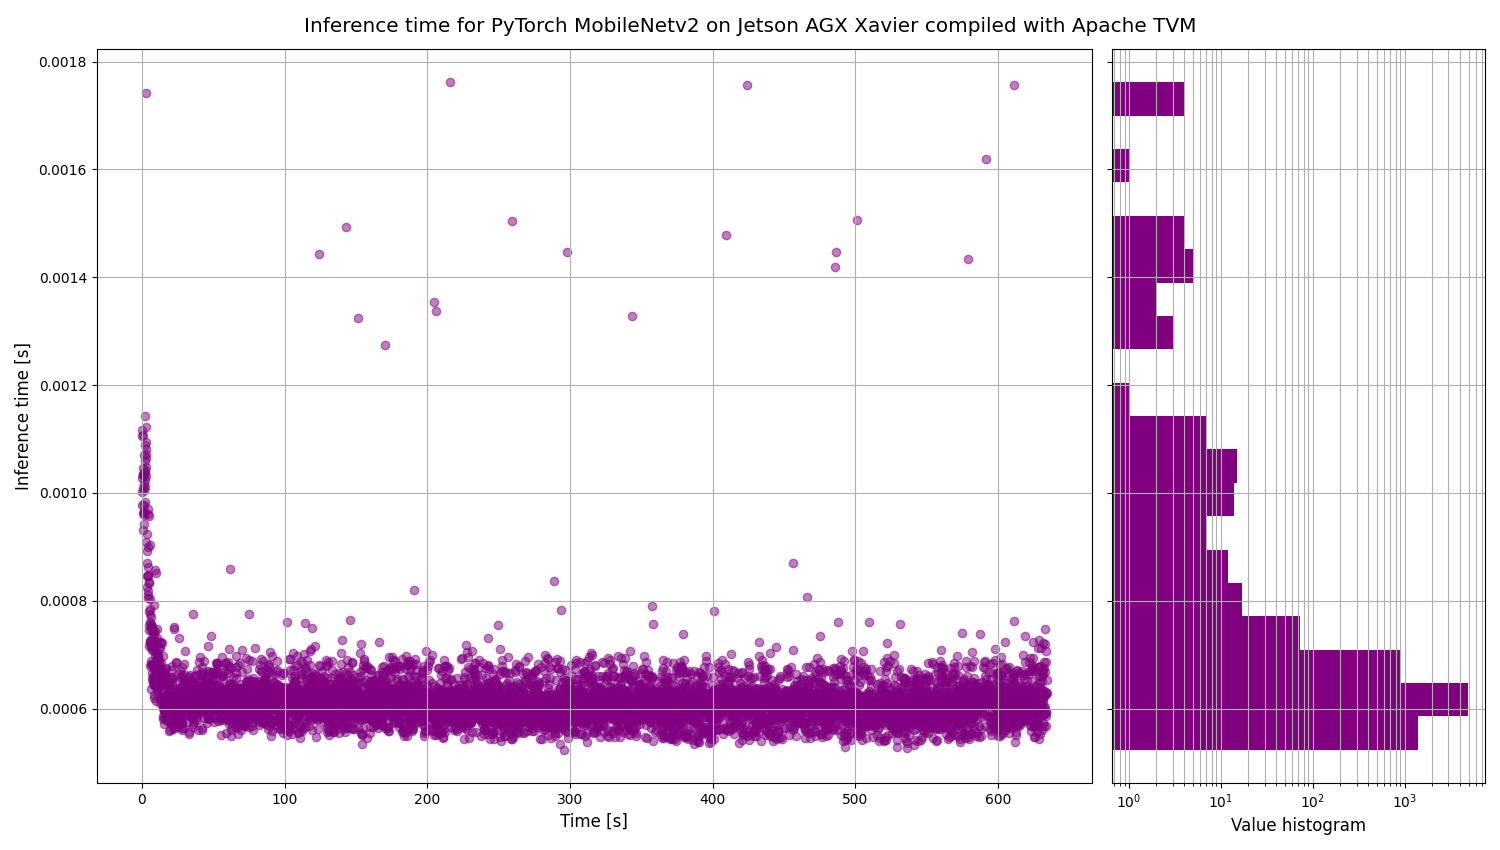 Inference time for PyTorch MobileNetv2 on Jetson AGX Xavier compiled with Apache TVM